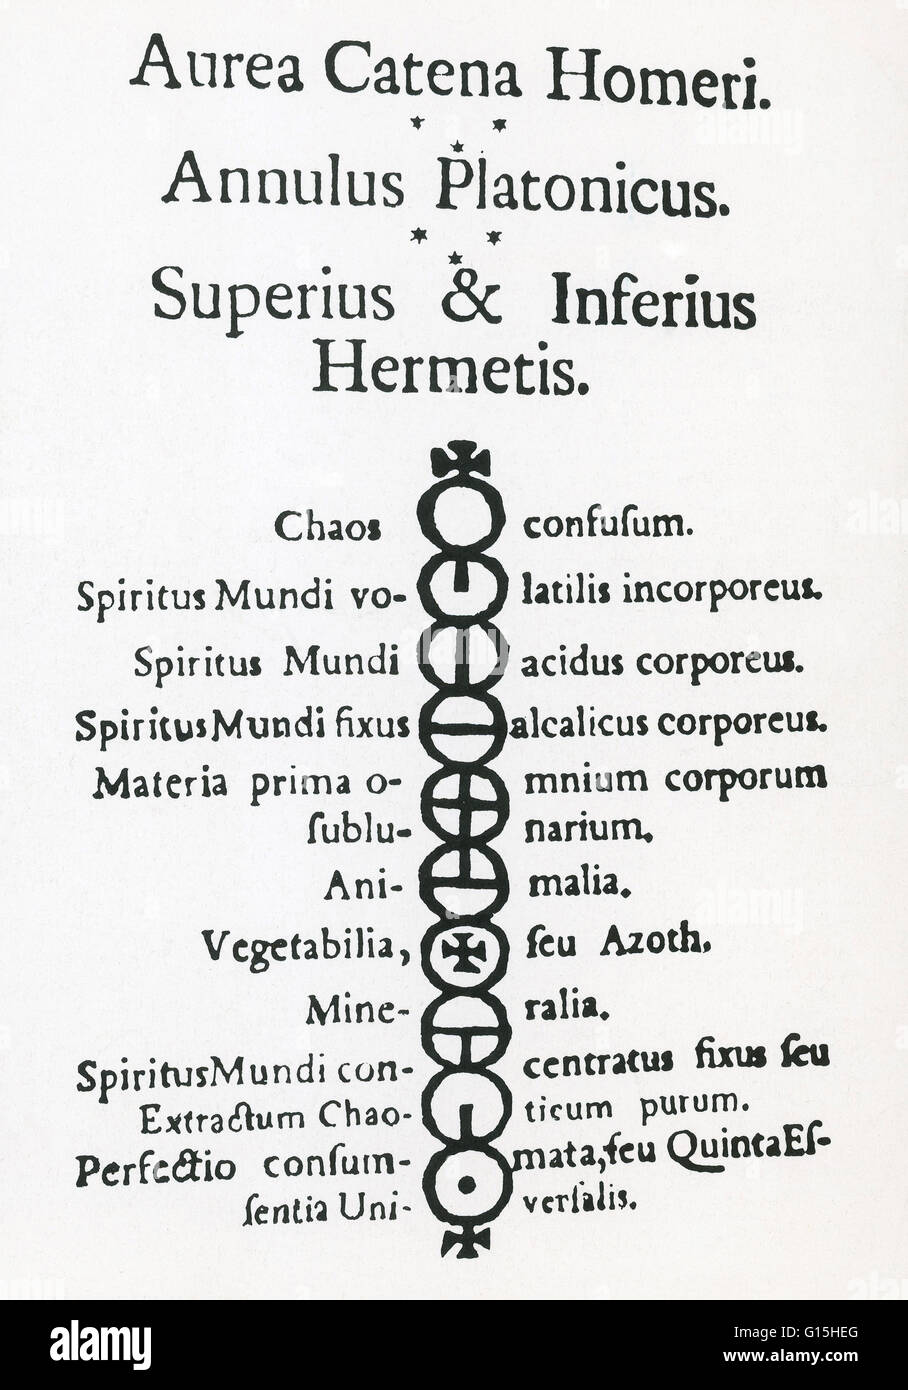 'The golden chain of Homer' (Aurea Catena Homeri), from the 1757 edition of Aurea Catena, which is a book of Alchemy describing the origin of nature and natural lichen things. Stock Photo